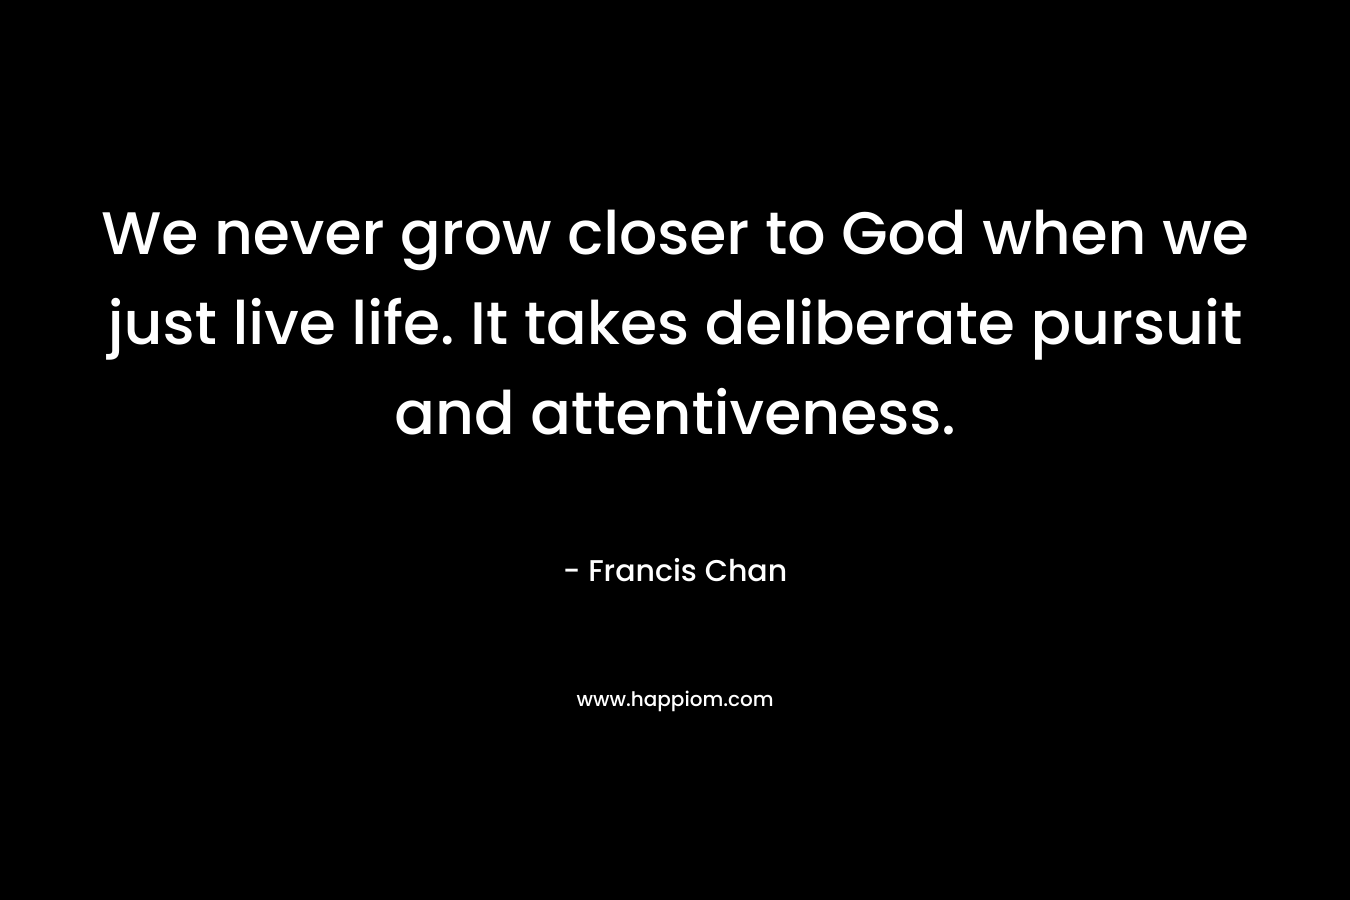 We never grow closer to God when we just live life. It takes deliberate pursuit and attentiveness. – Francis Chan